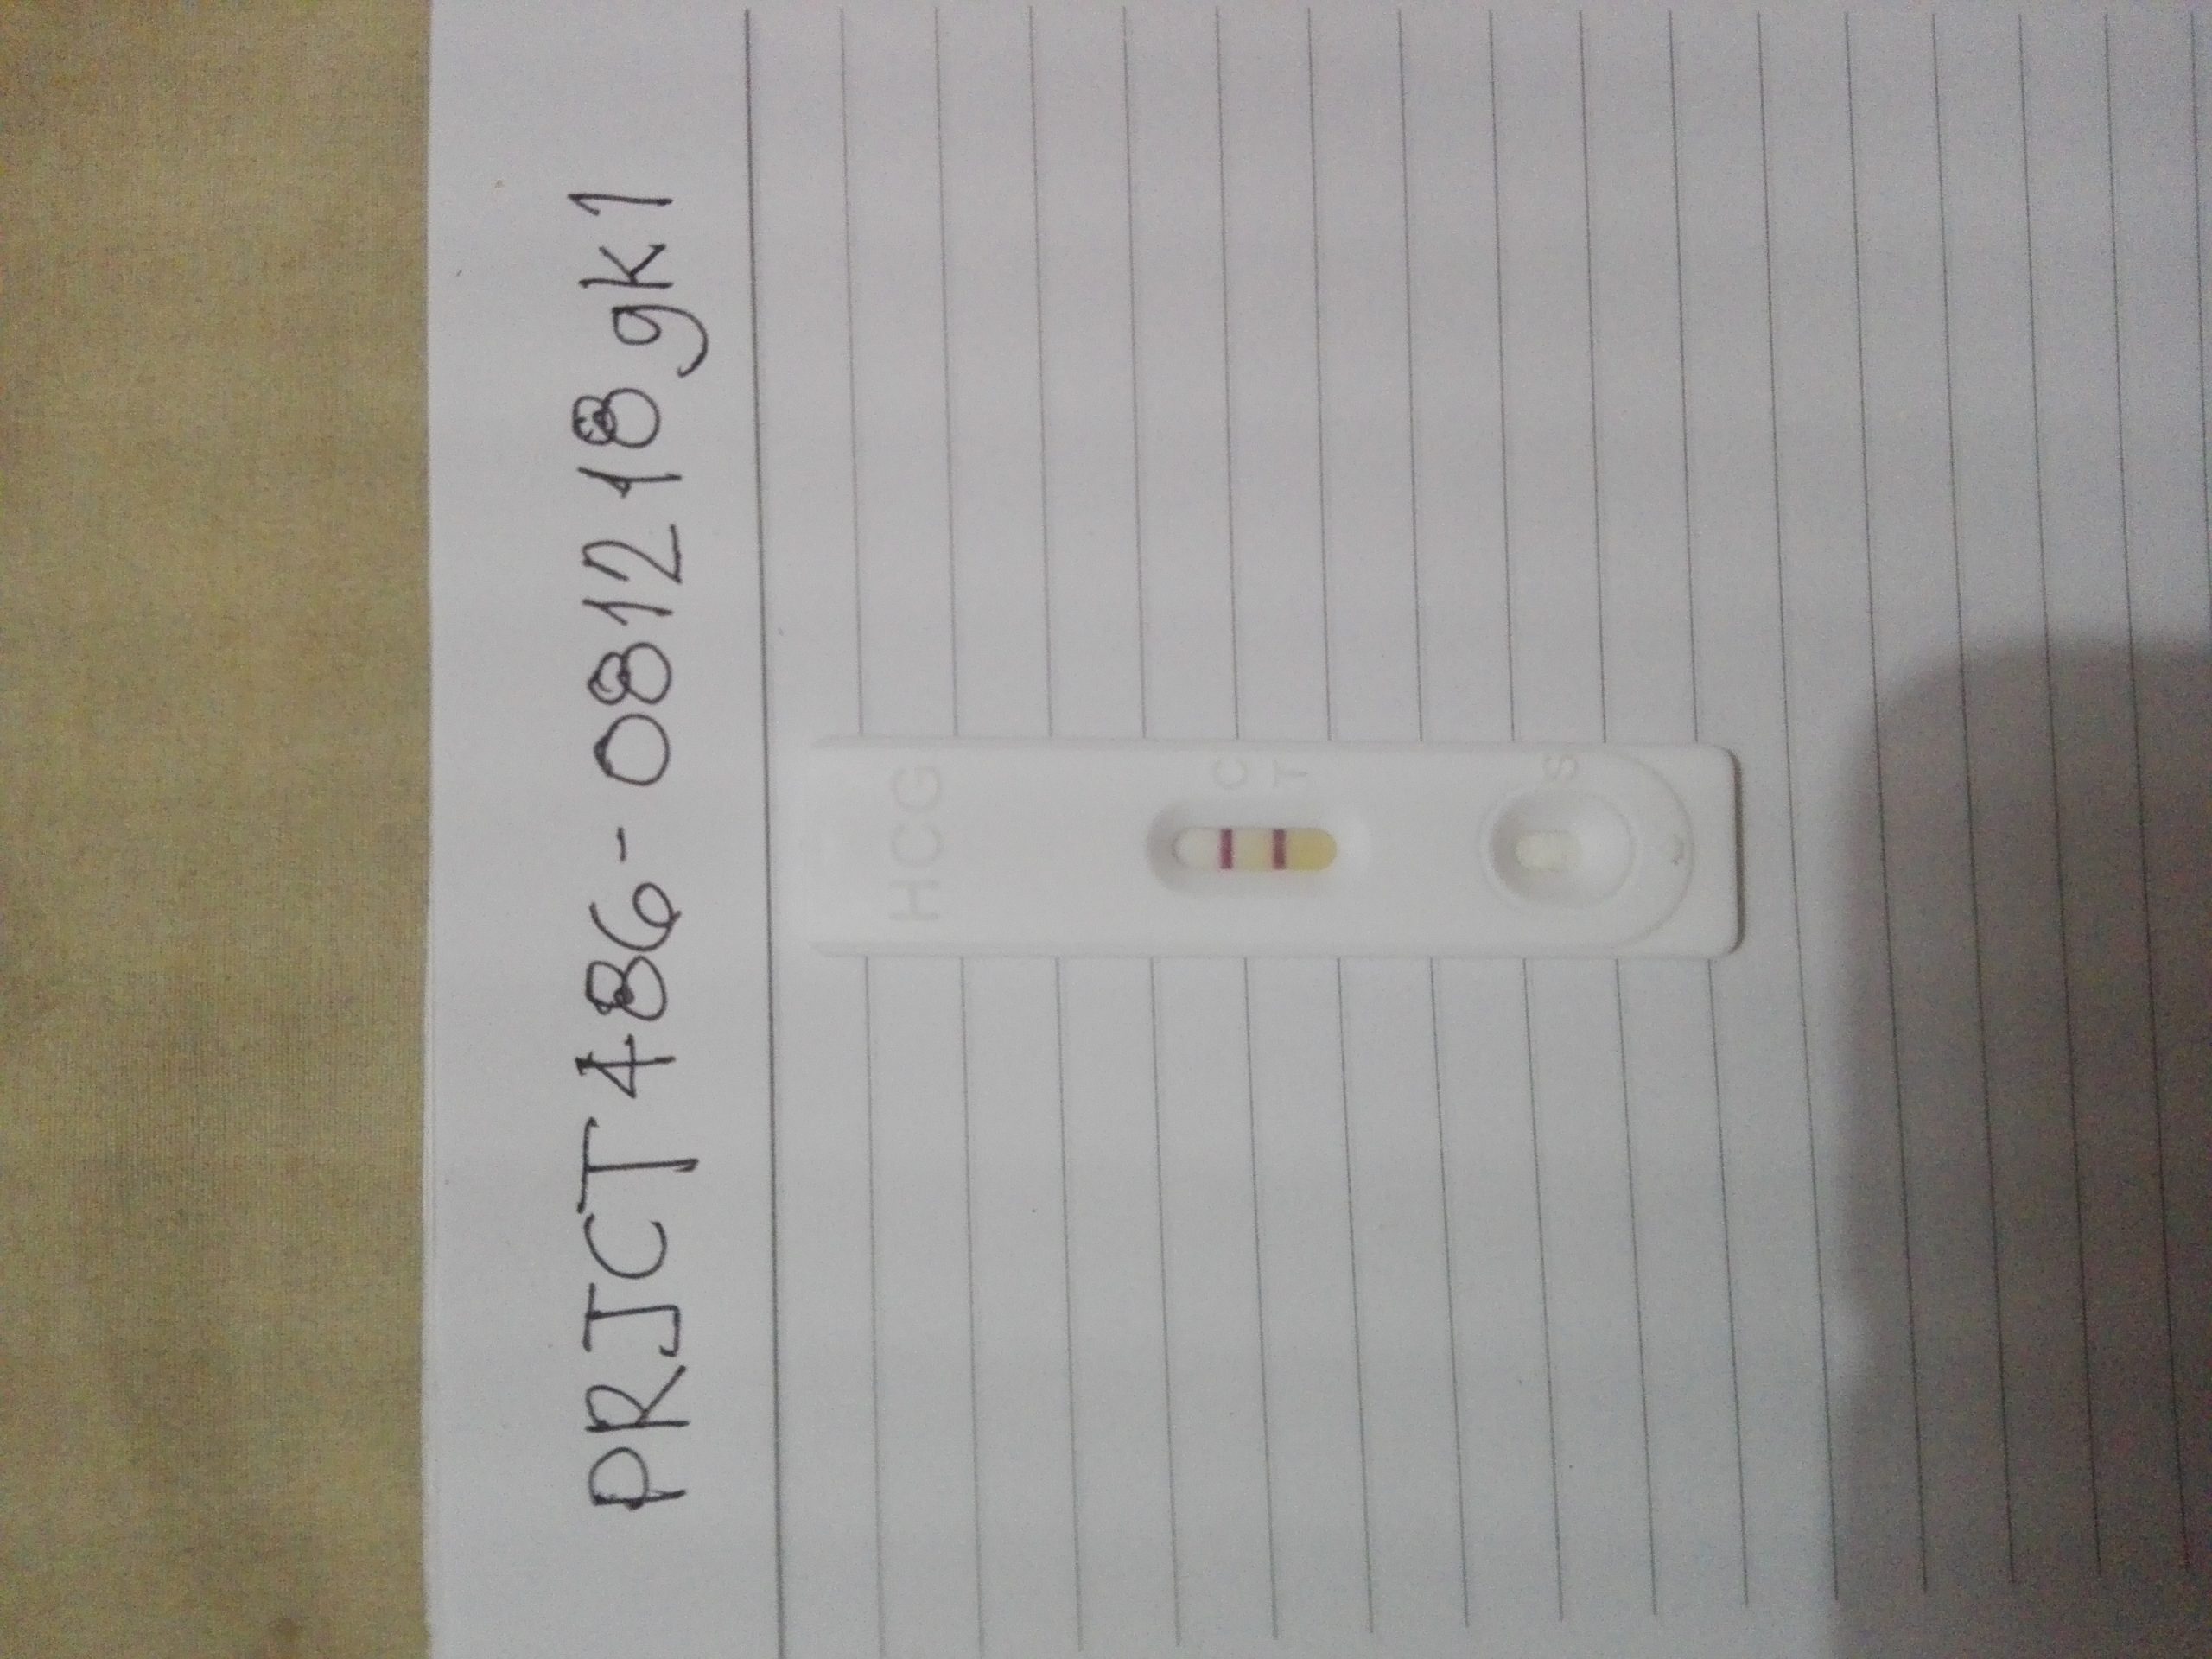 Pictures of Positive Pregnancy test results are required by Project 486 to confirm patient's pregnancy